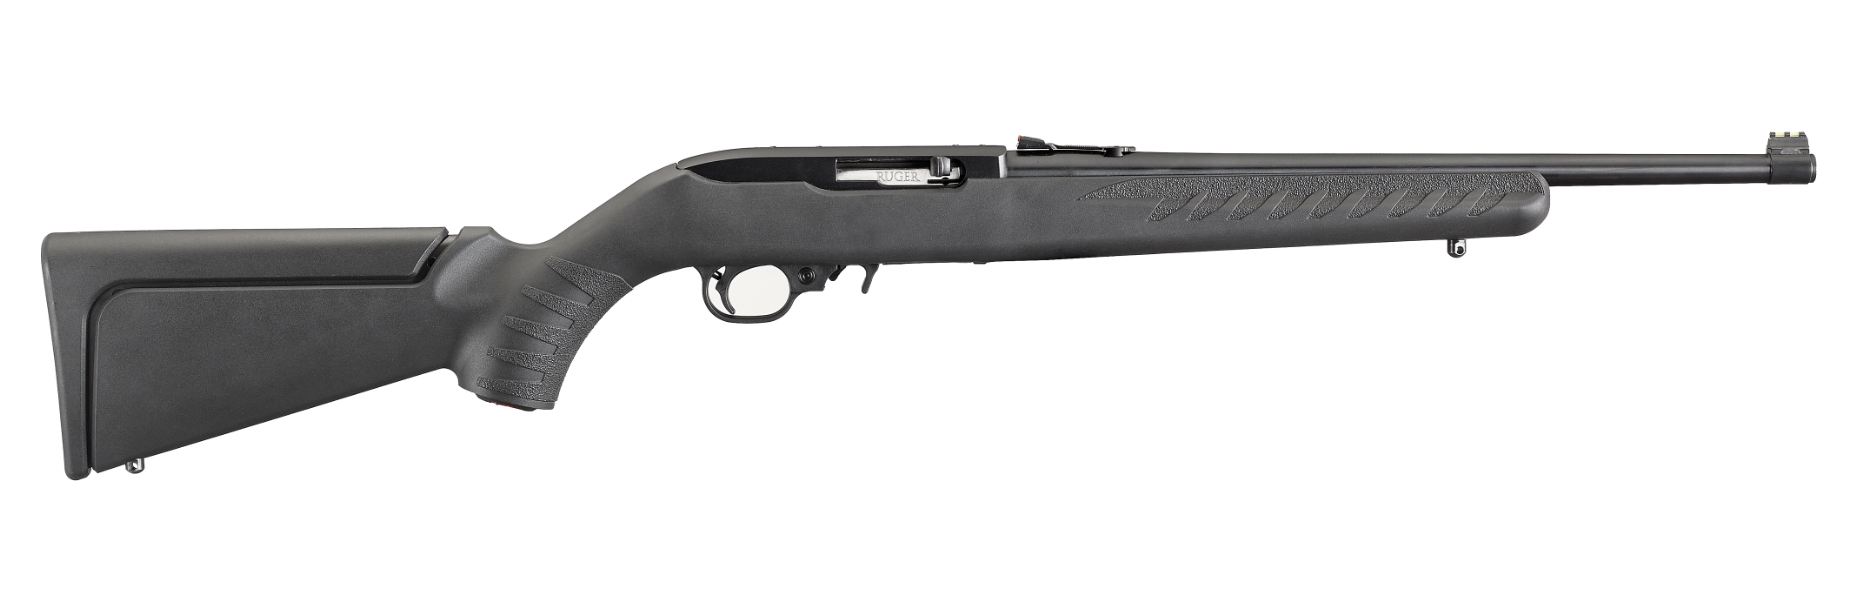 10/22 COMPACT 22LR BL/SYN 31114-img-0